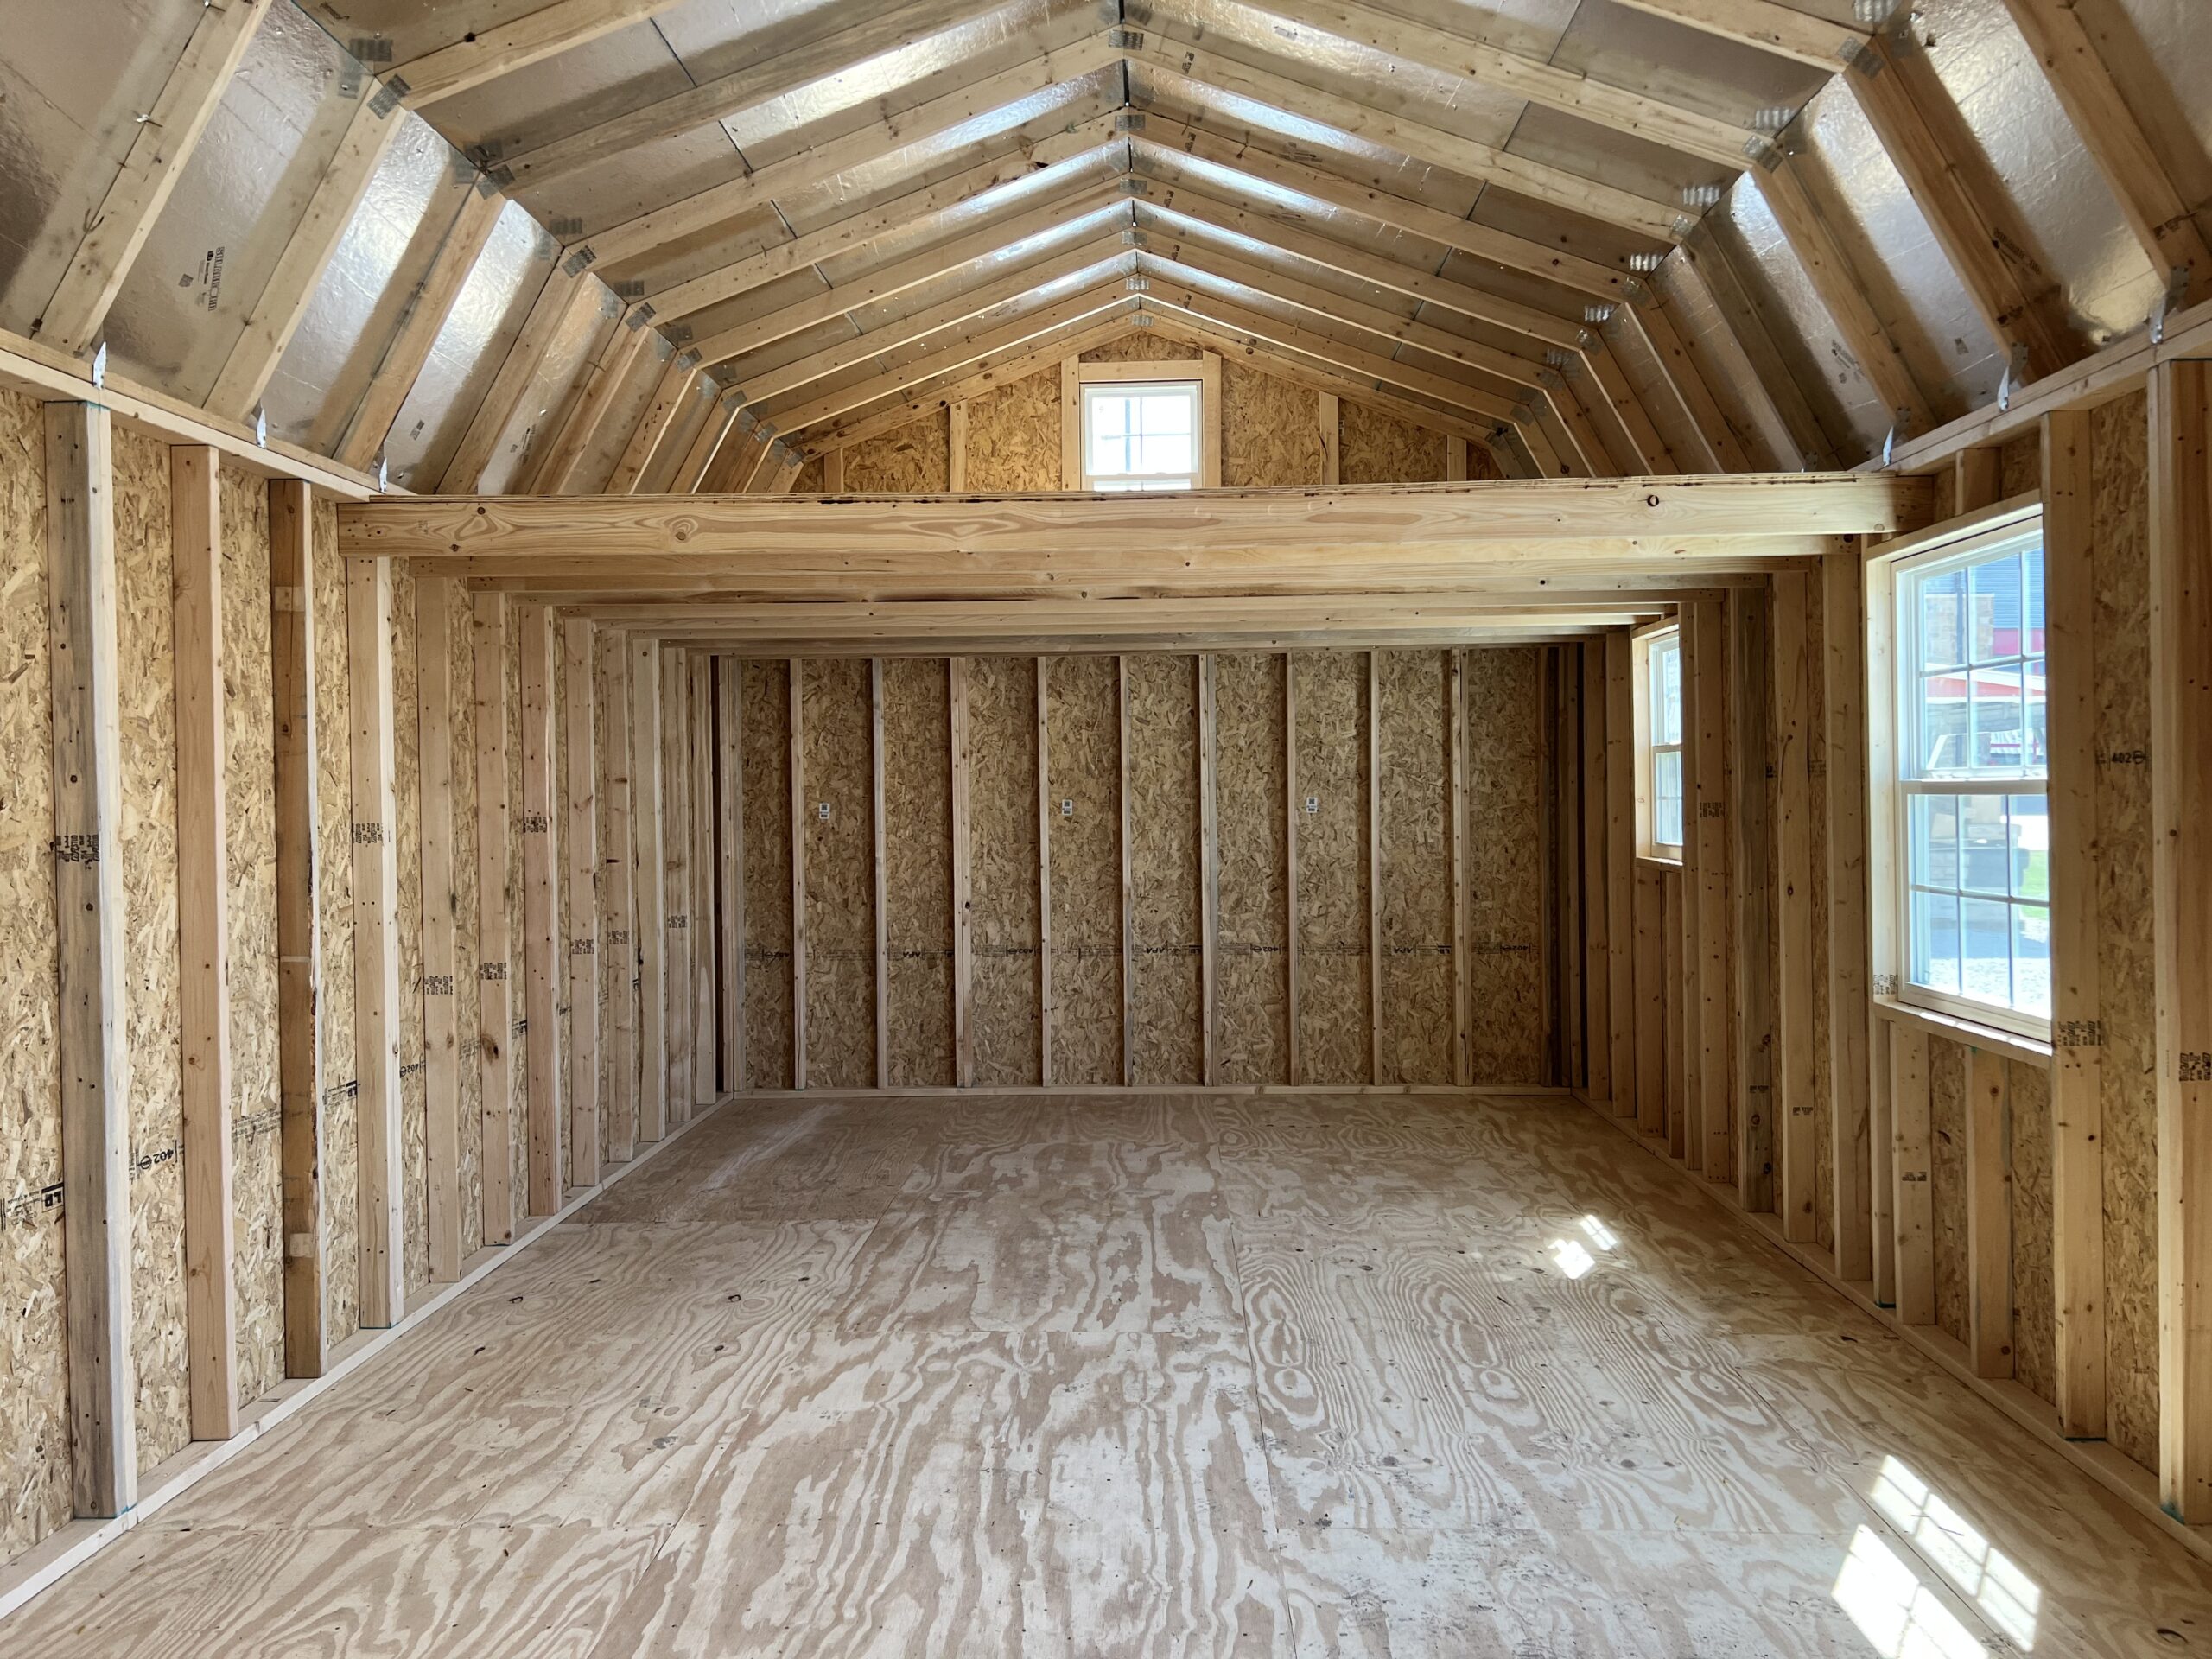 Close-up view of 12 x 14 loft inside the 14 x 32 lofted barn 